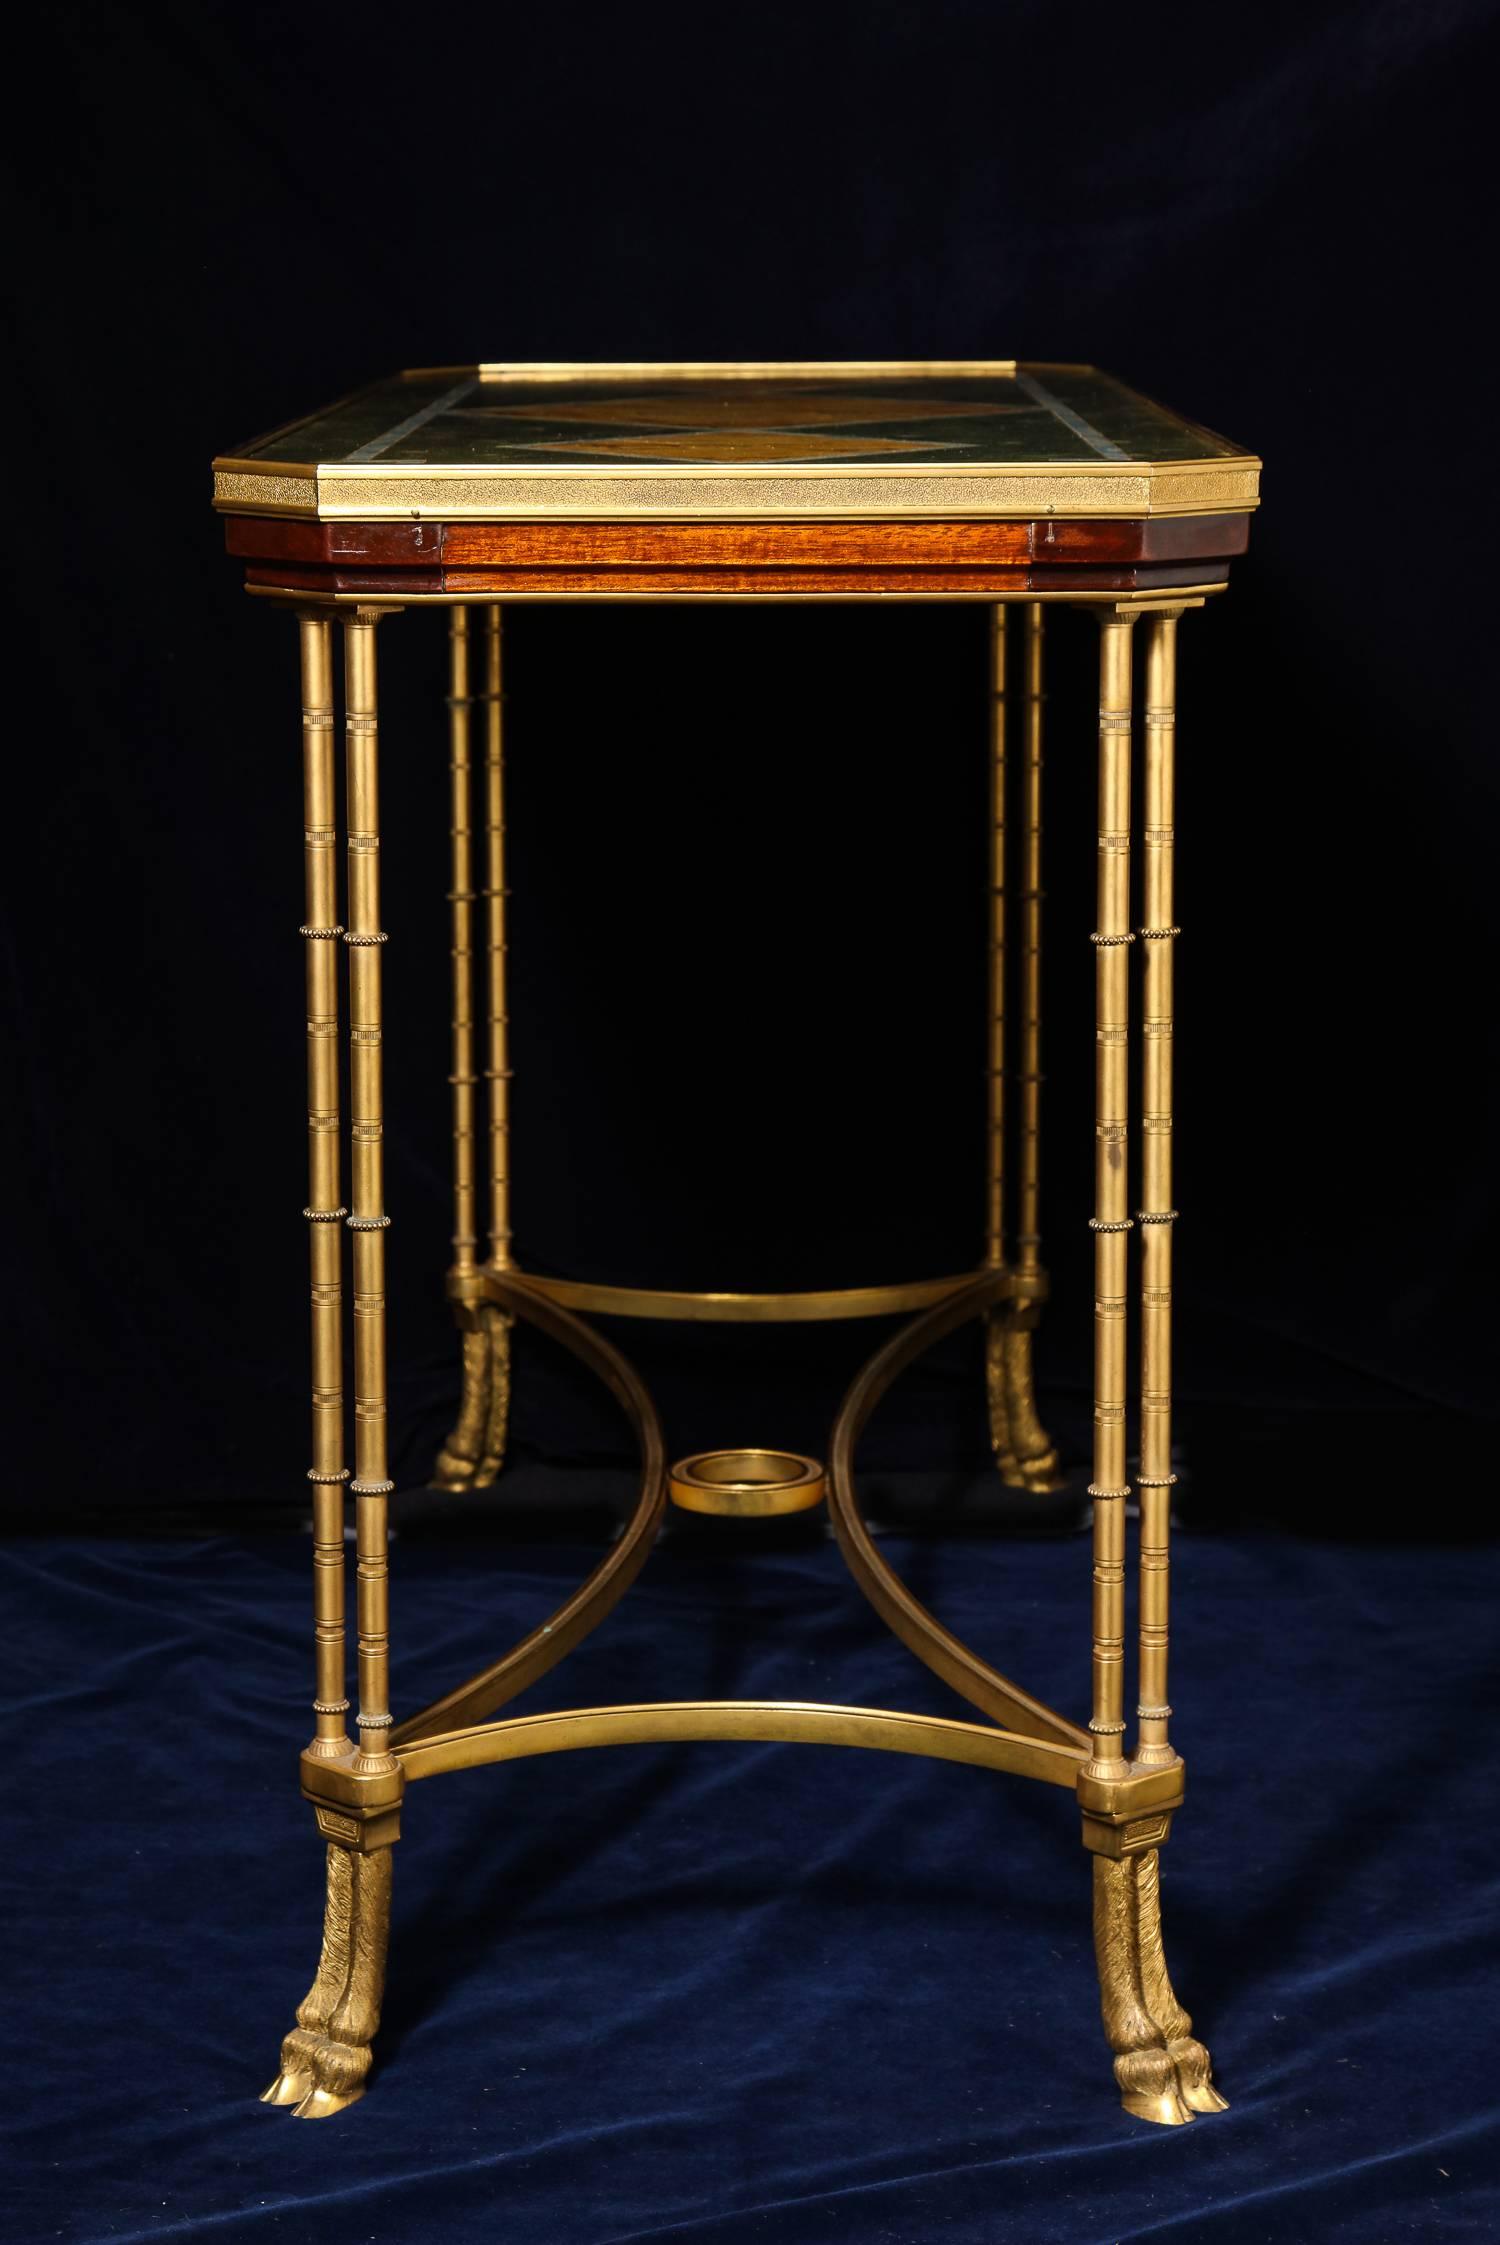 20th Century Pair of Antique French Louis XVI Style Gilt Bronze Side or Console Tables